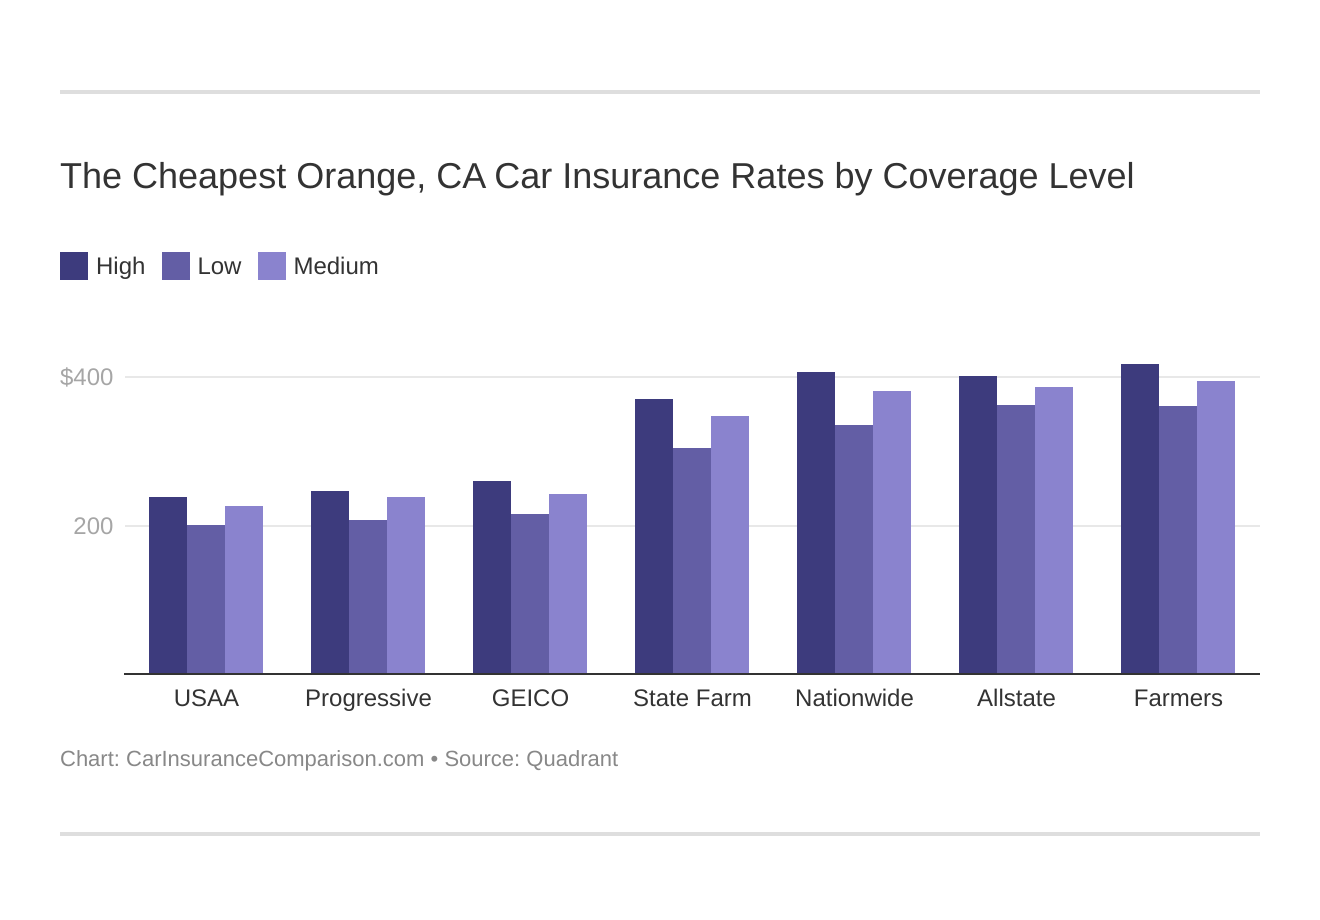 The Cheapest Orange, CA Car Insurance Rates by Coverage Level